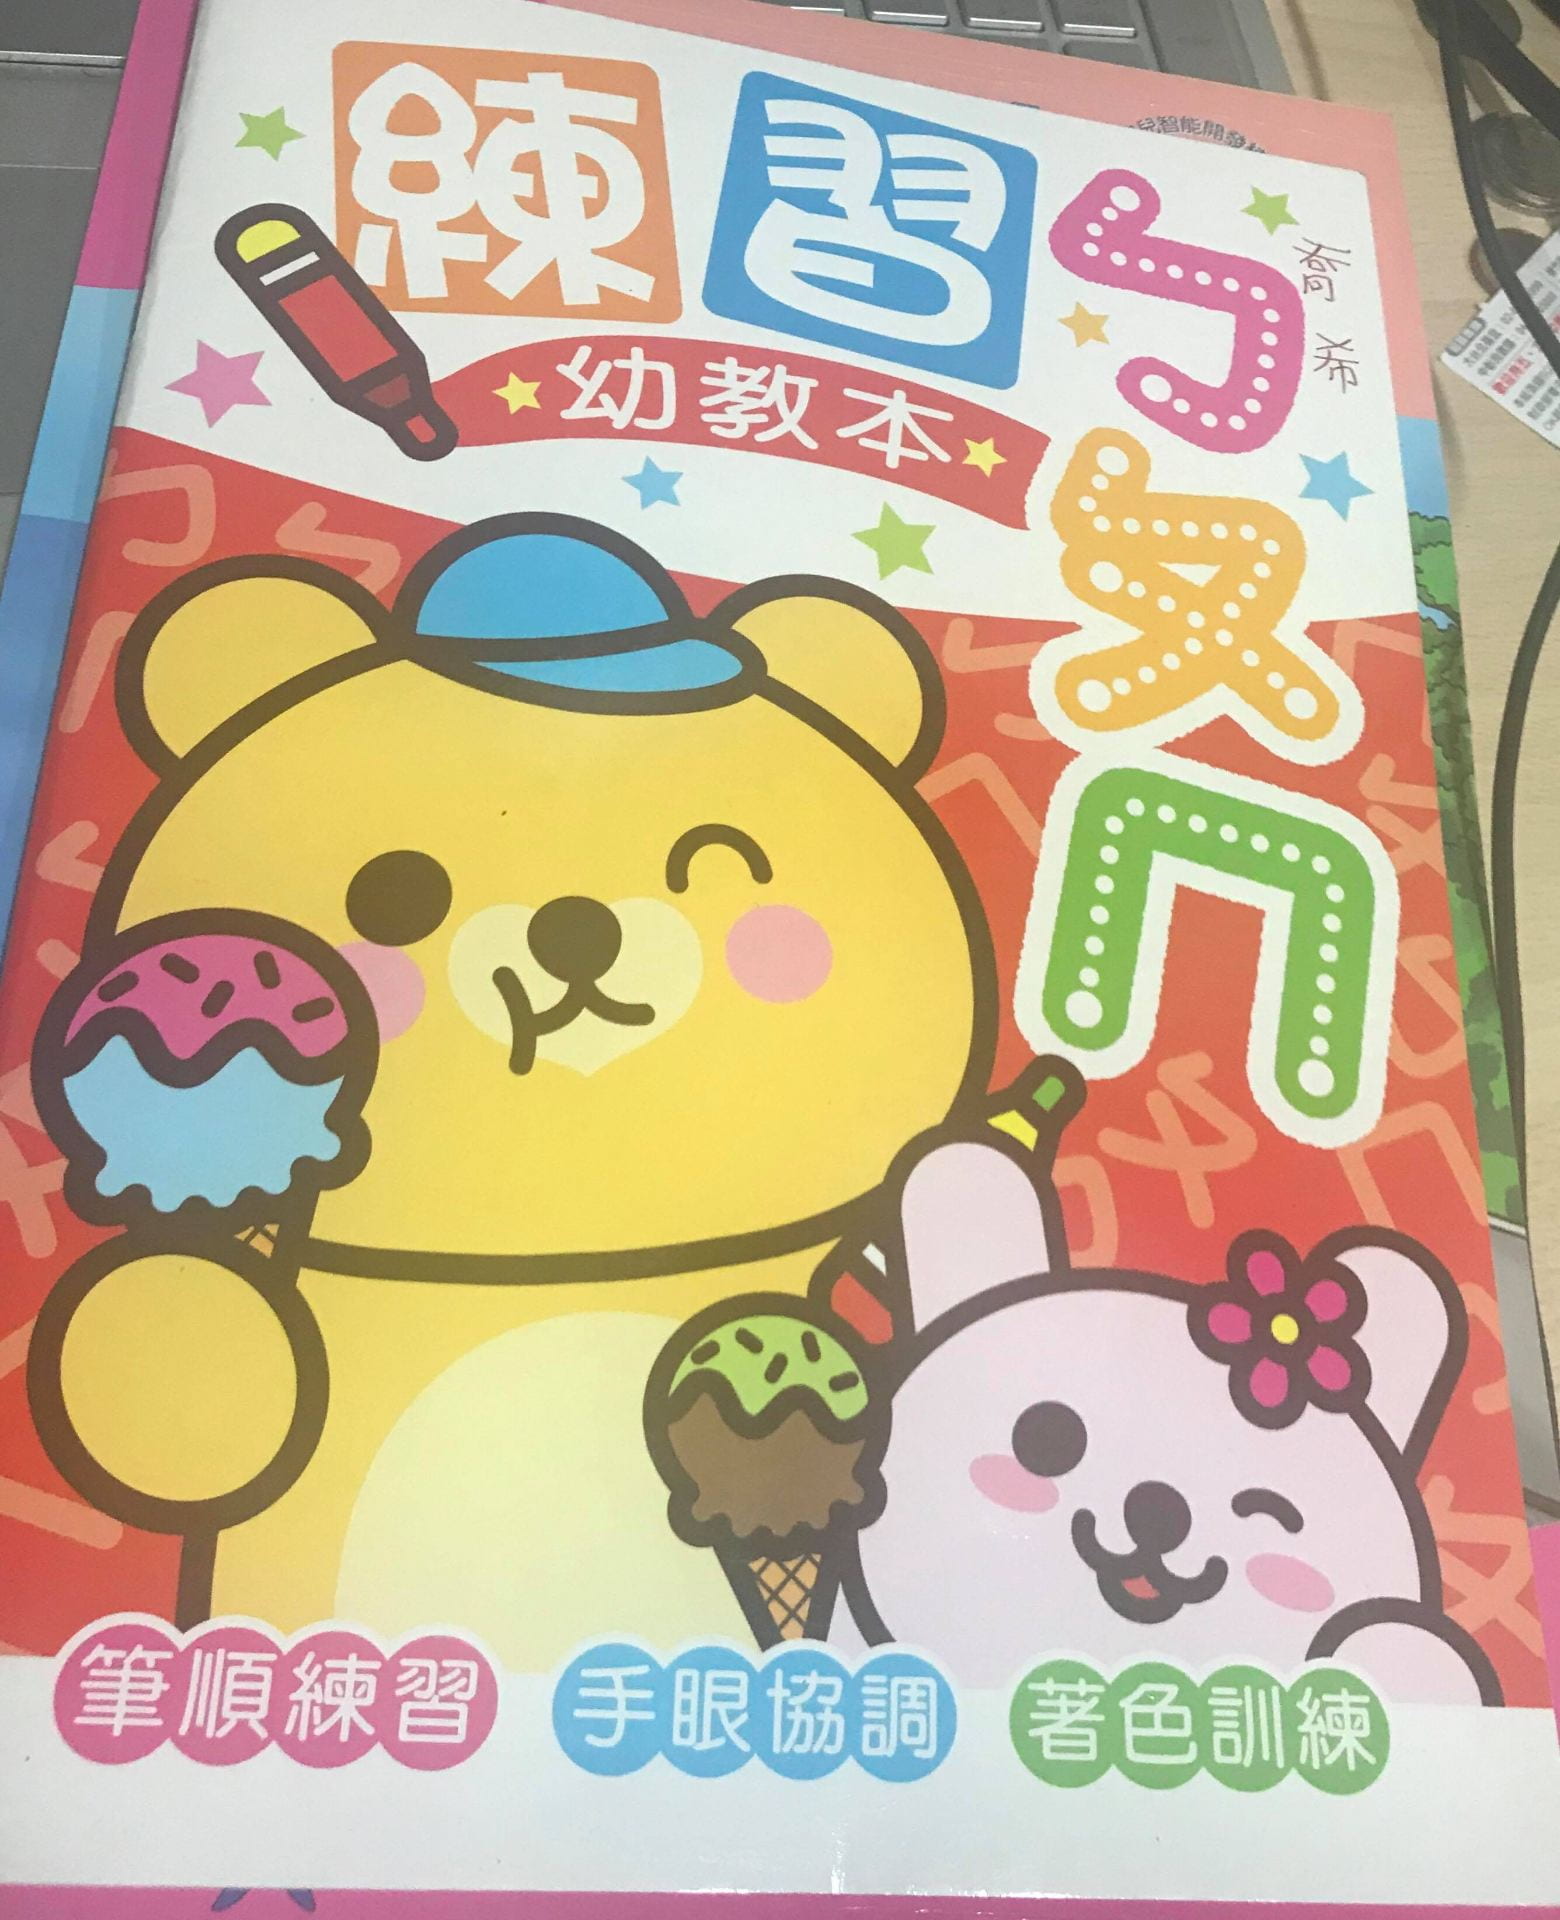 A children's practice book with a light brown bear and pink rabbit eating ice cream 